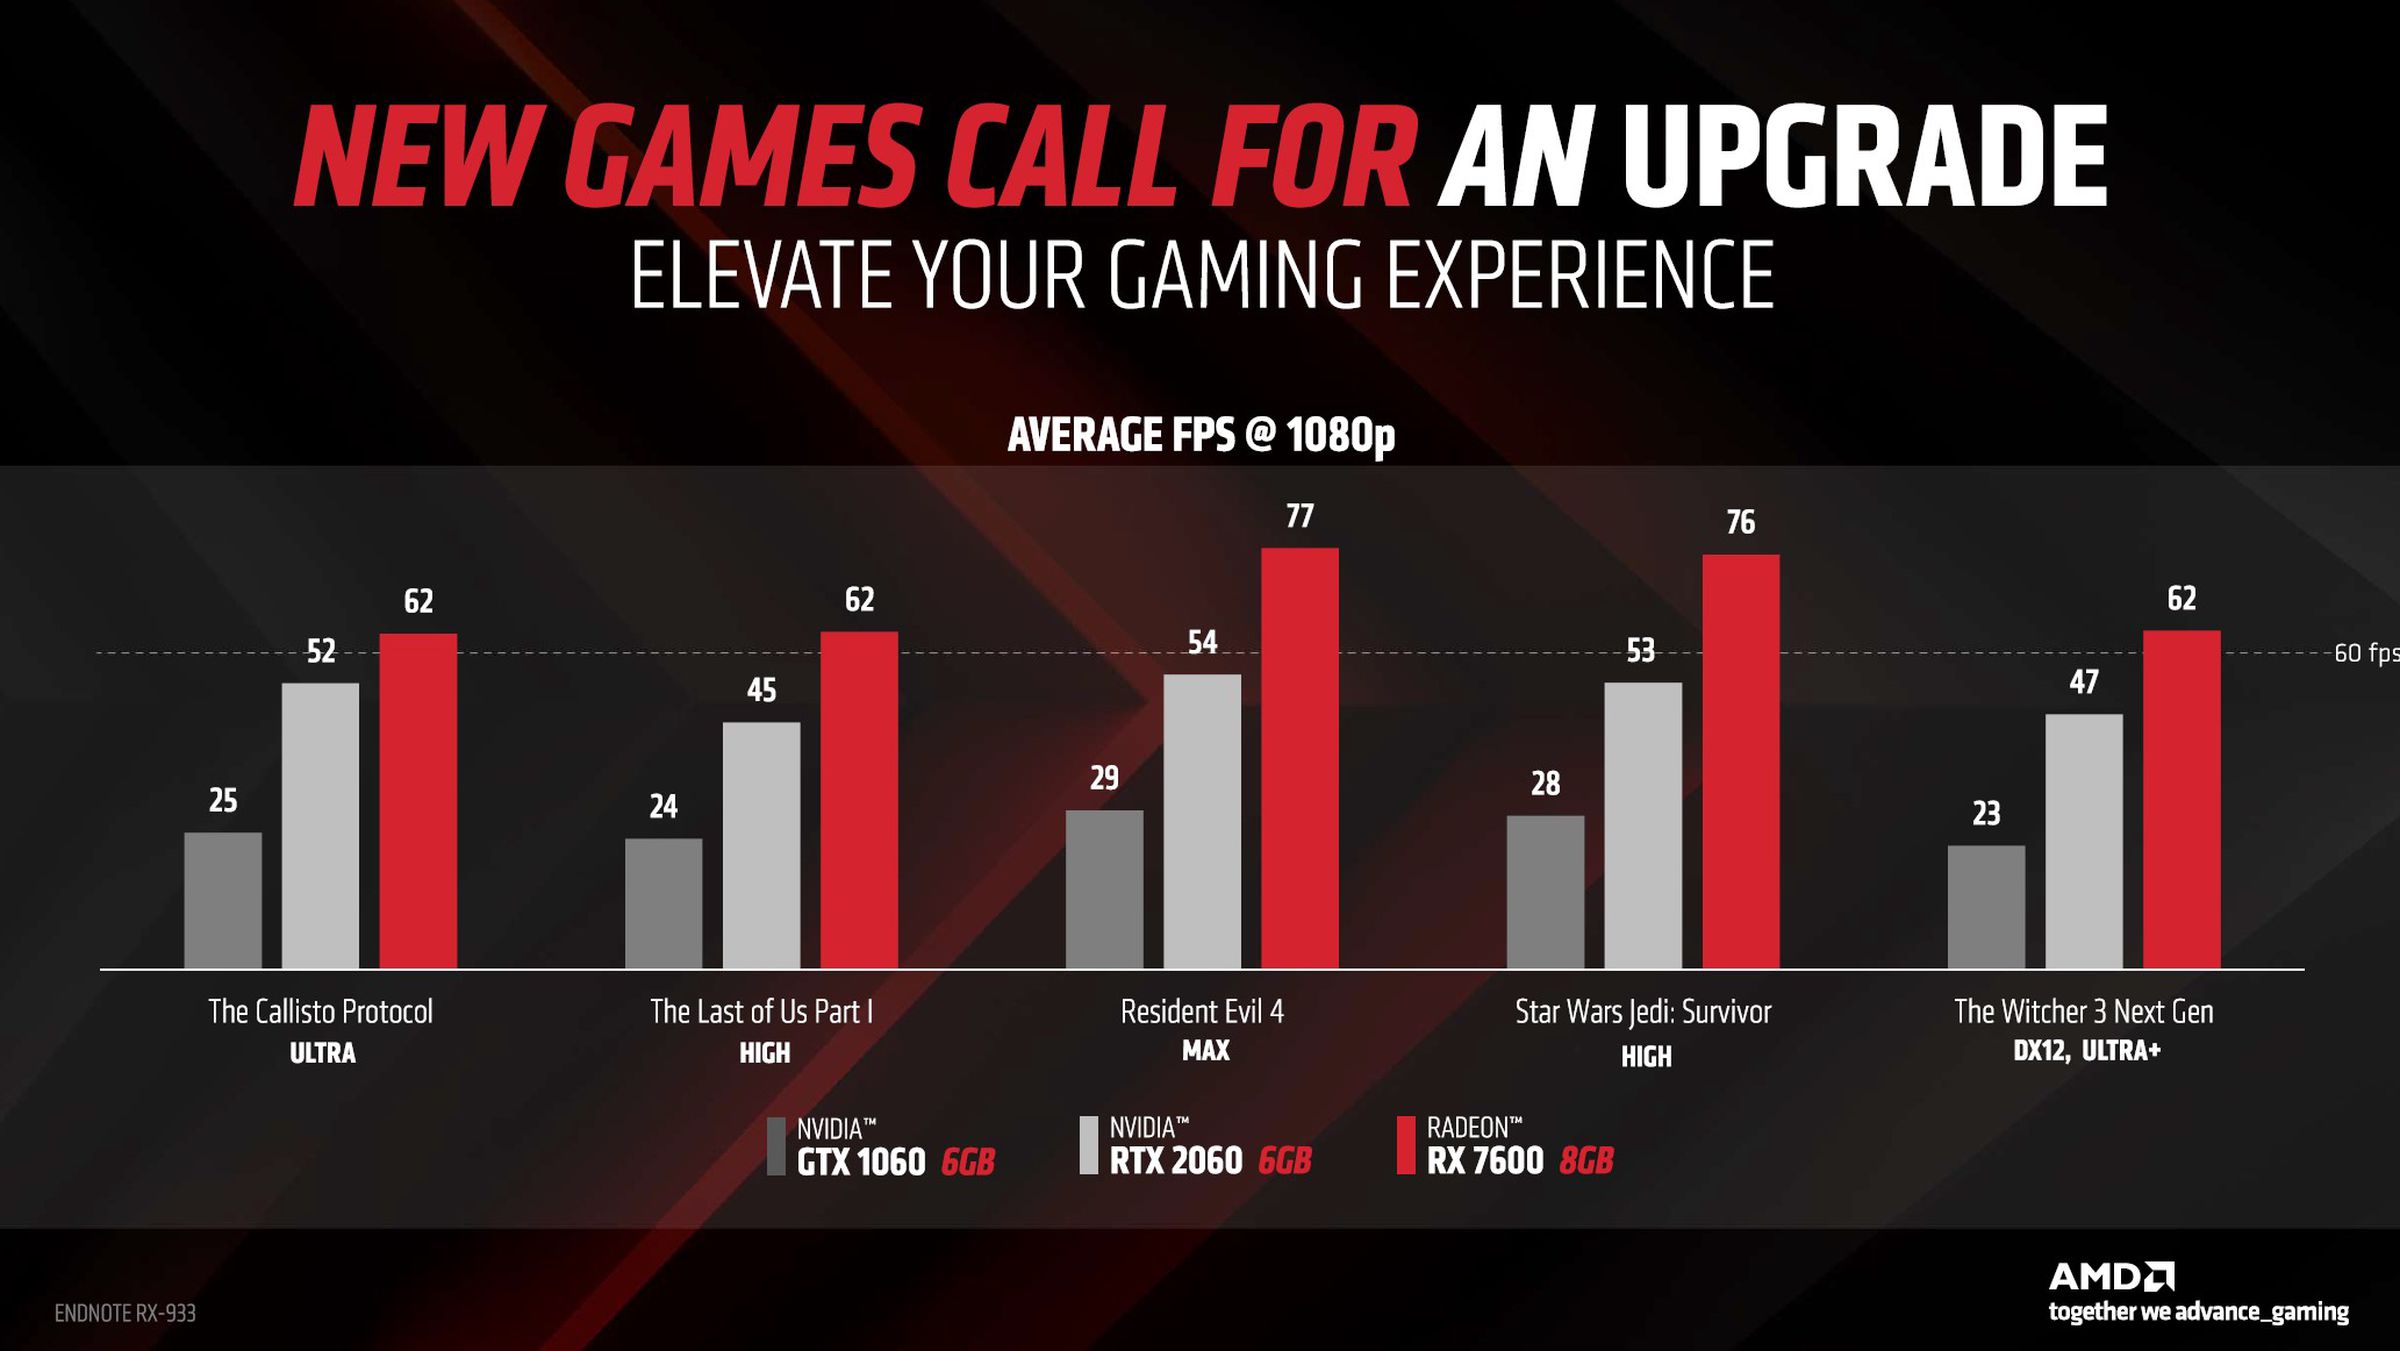 A screenshot taken from AMD’s Radeon RX 7600 announcement displaying projected GPU performance.